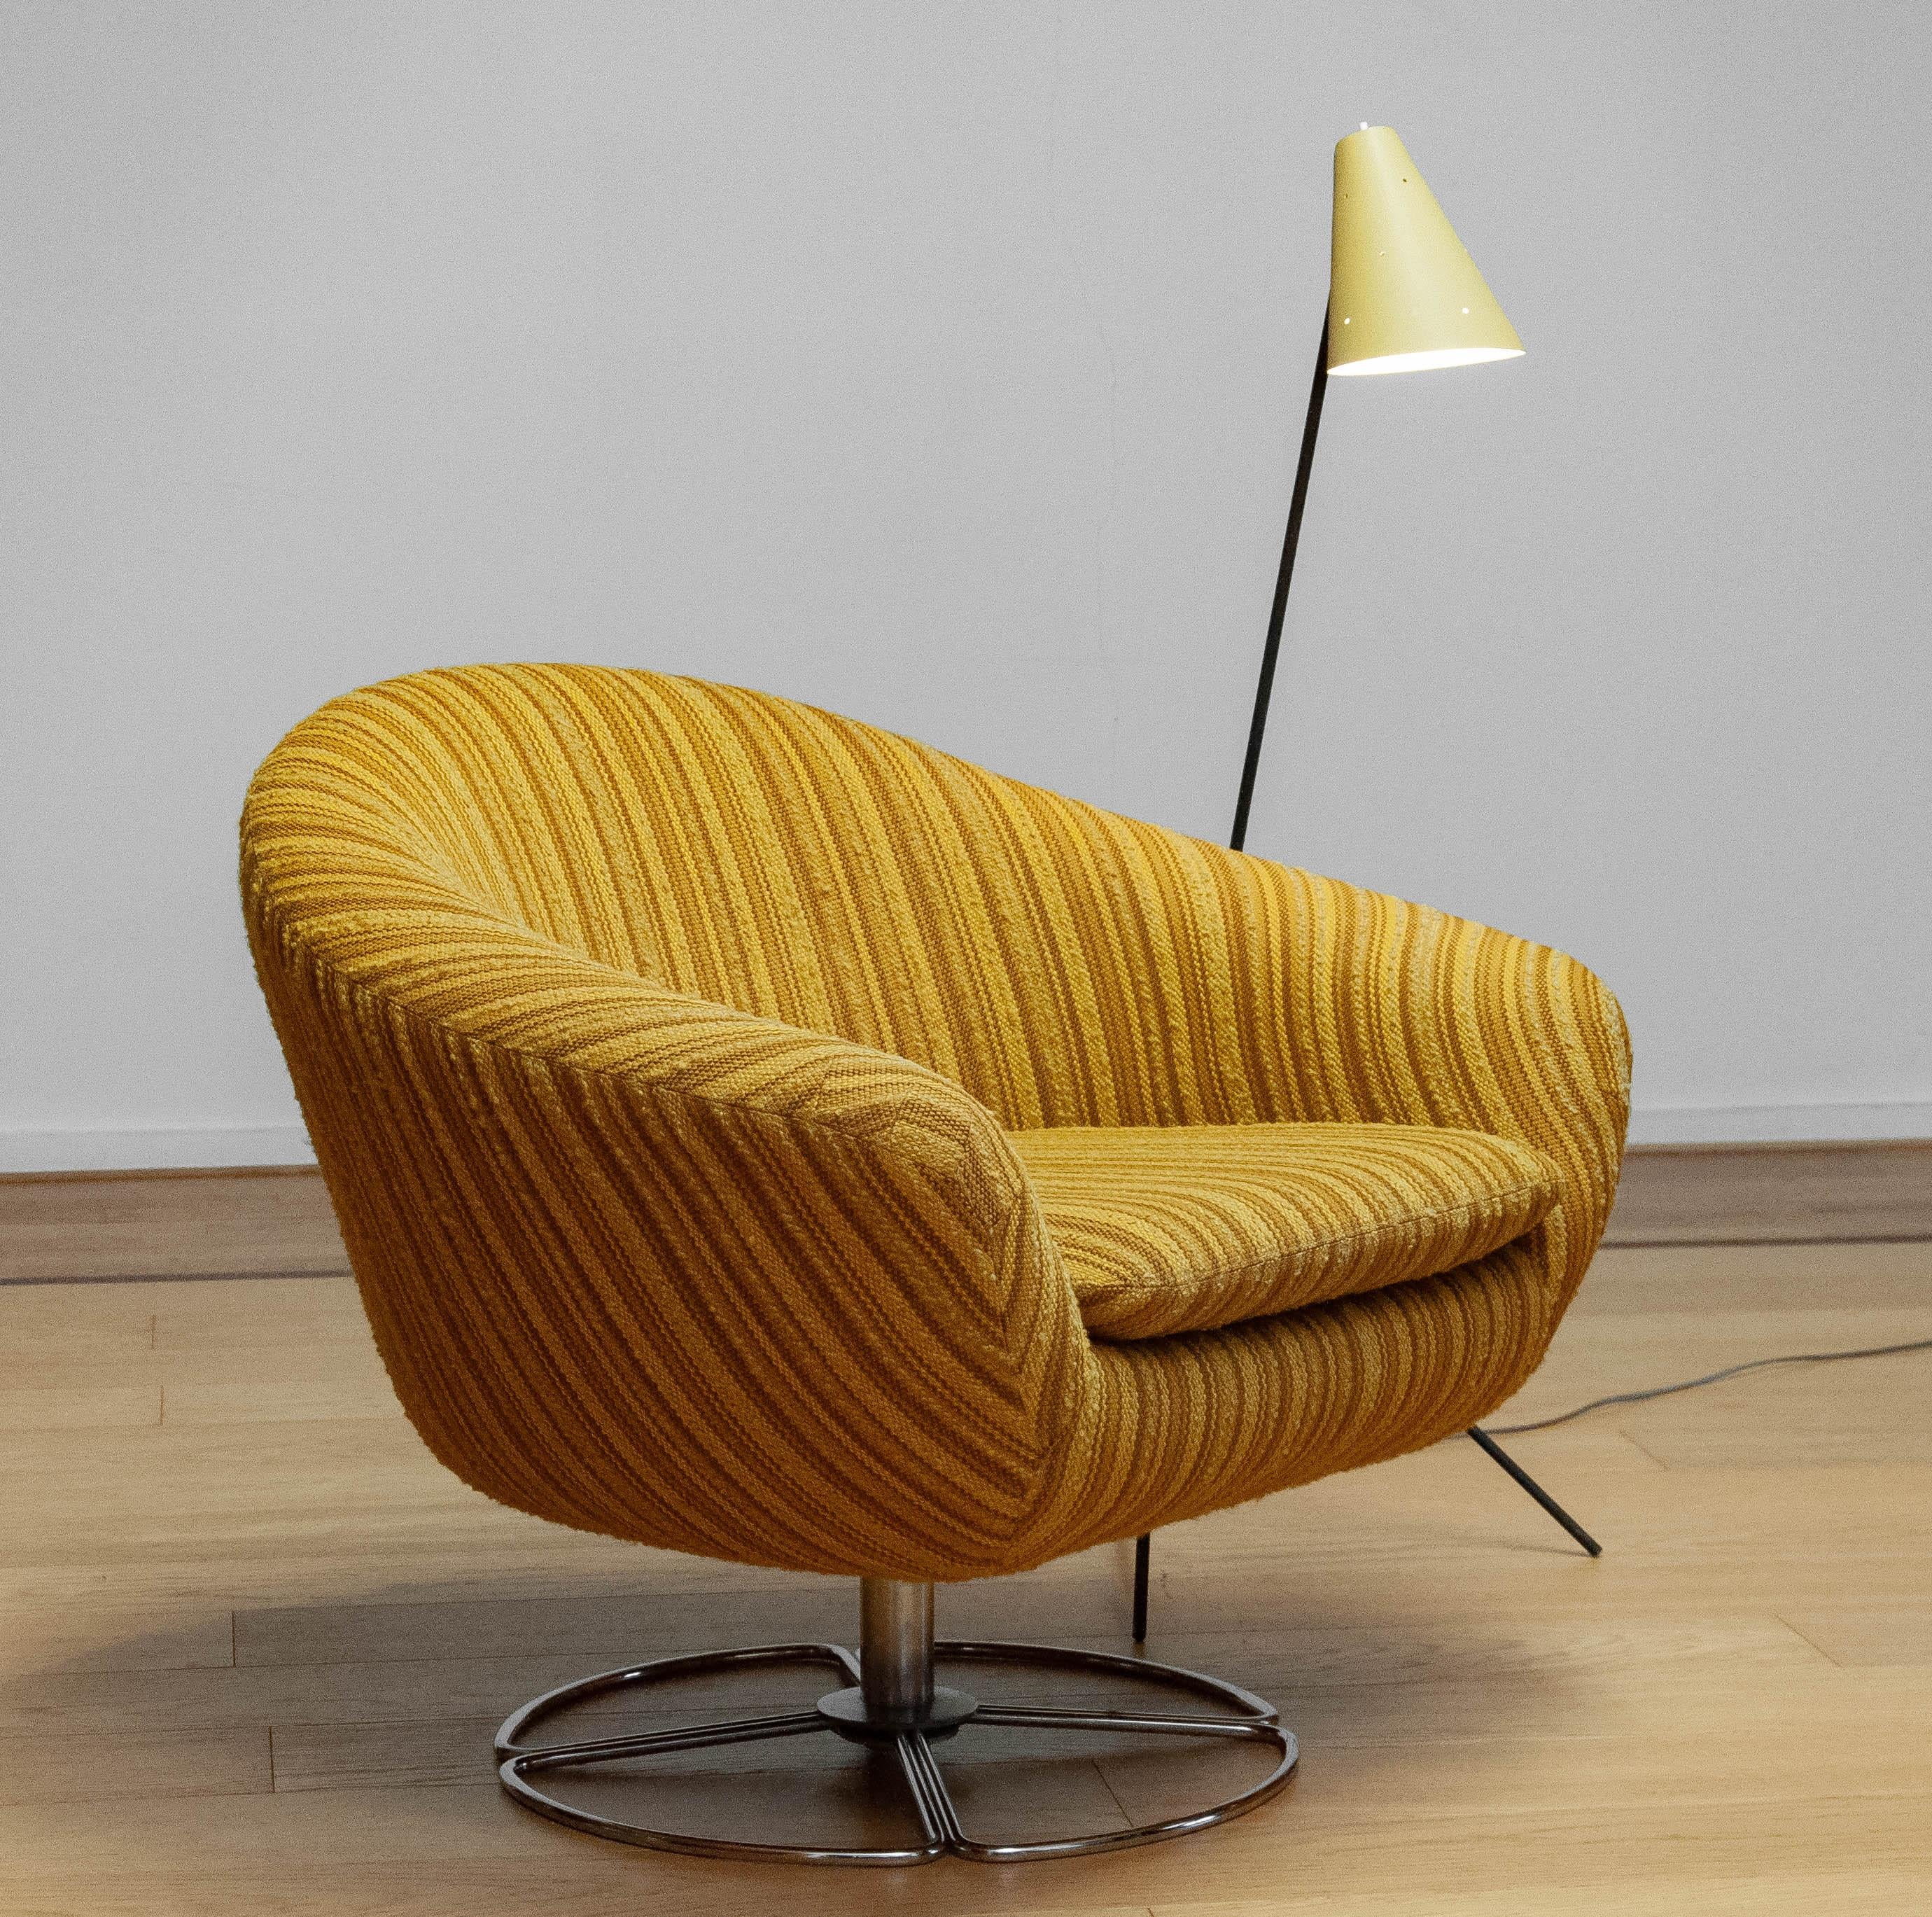 1960s Maize Yellow Bouclé Fabric Upholstered Swivel Chair By Dux Of Sweden In Good Condition For Sale In Silvolde, Gelderland